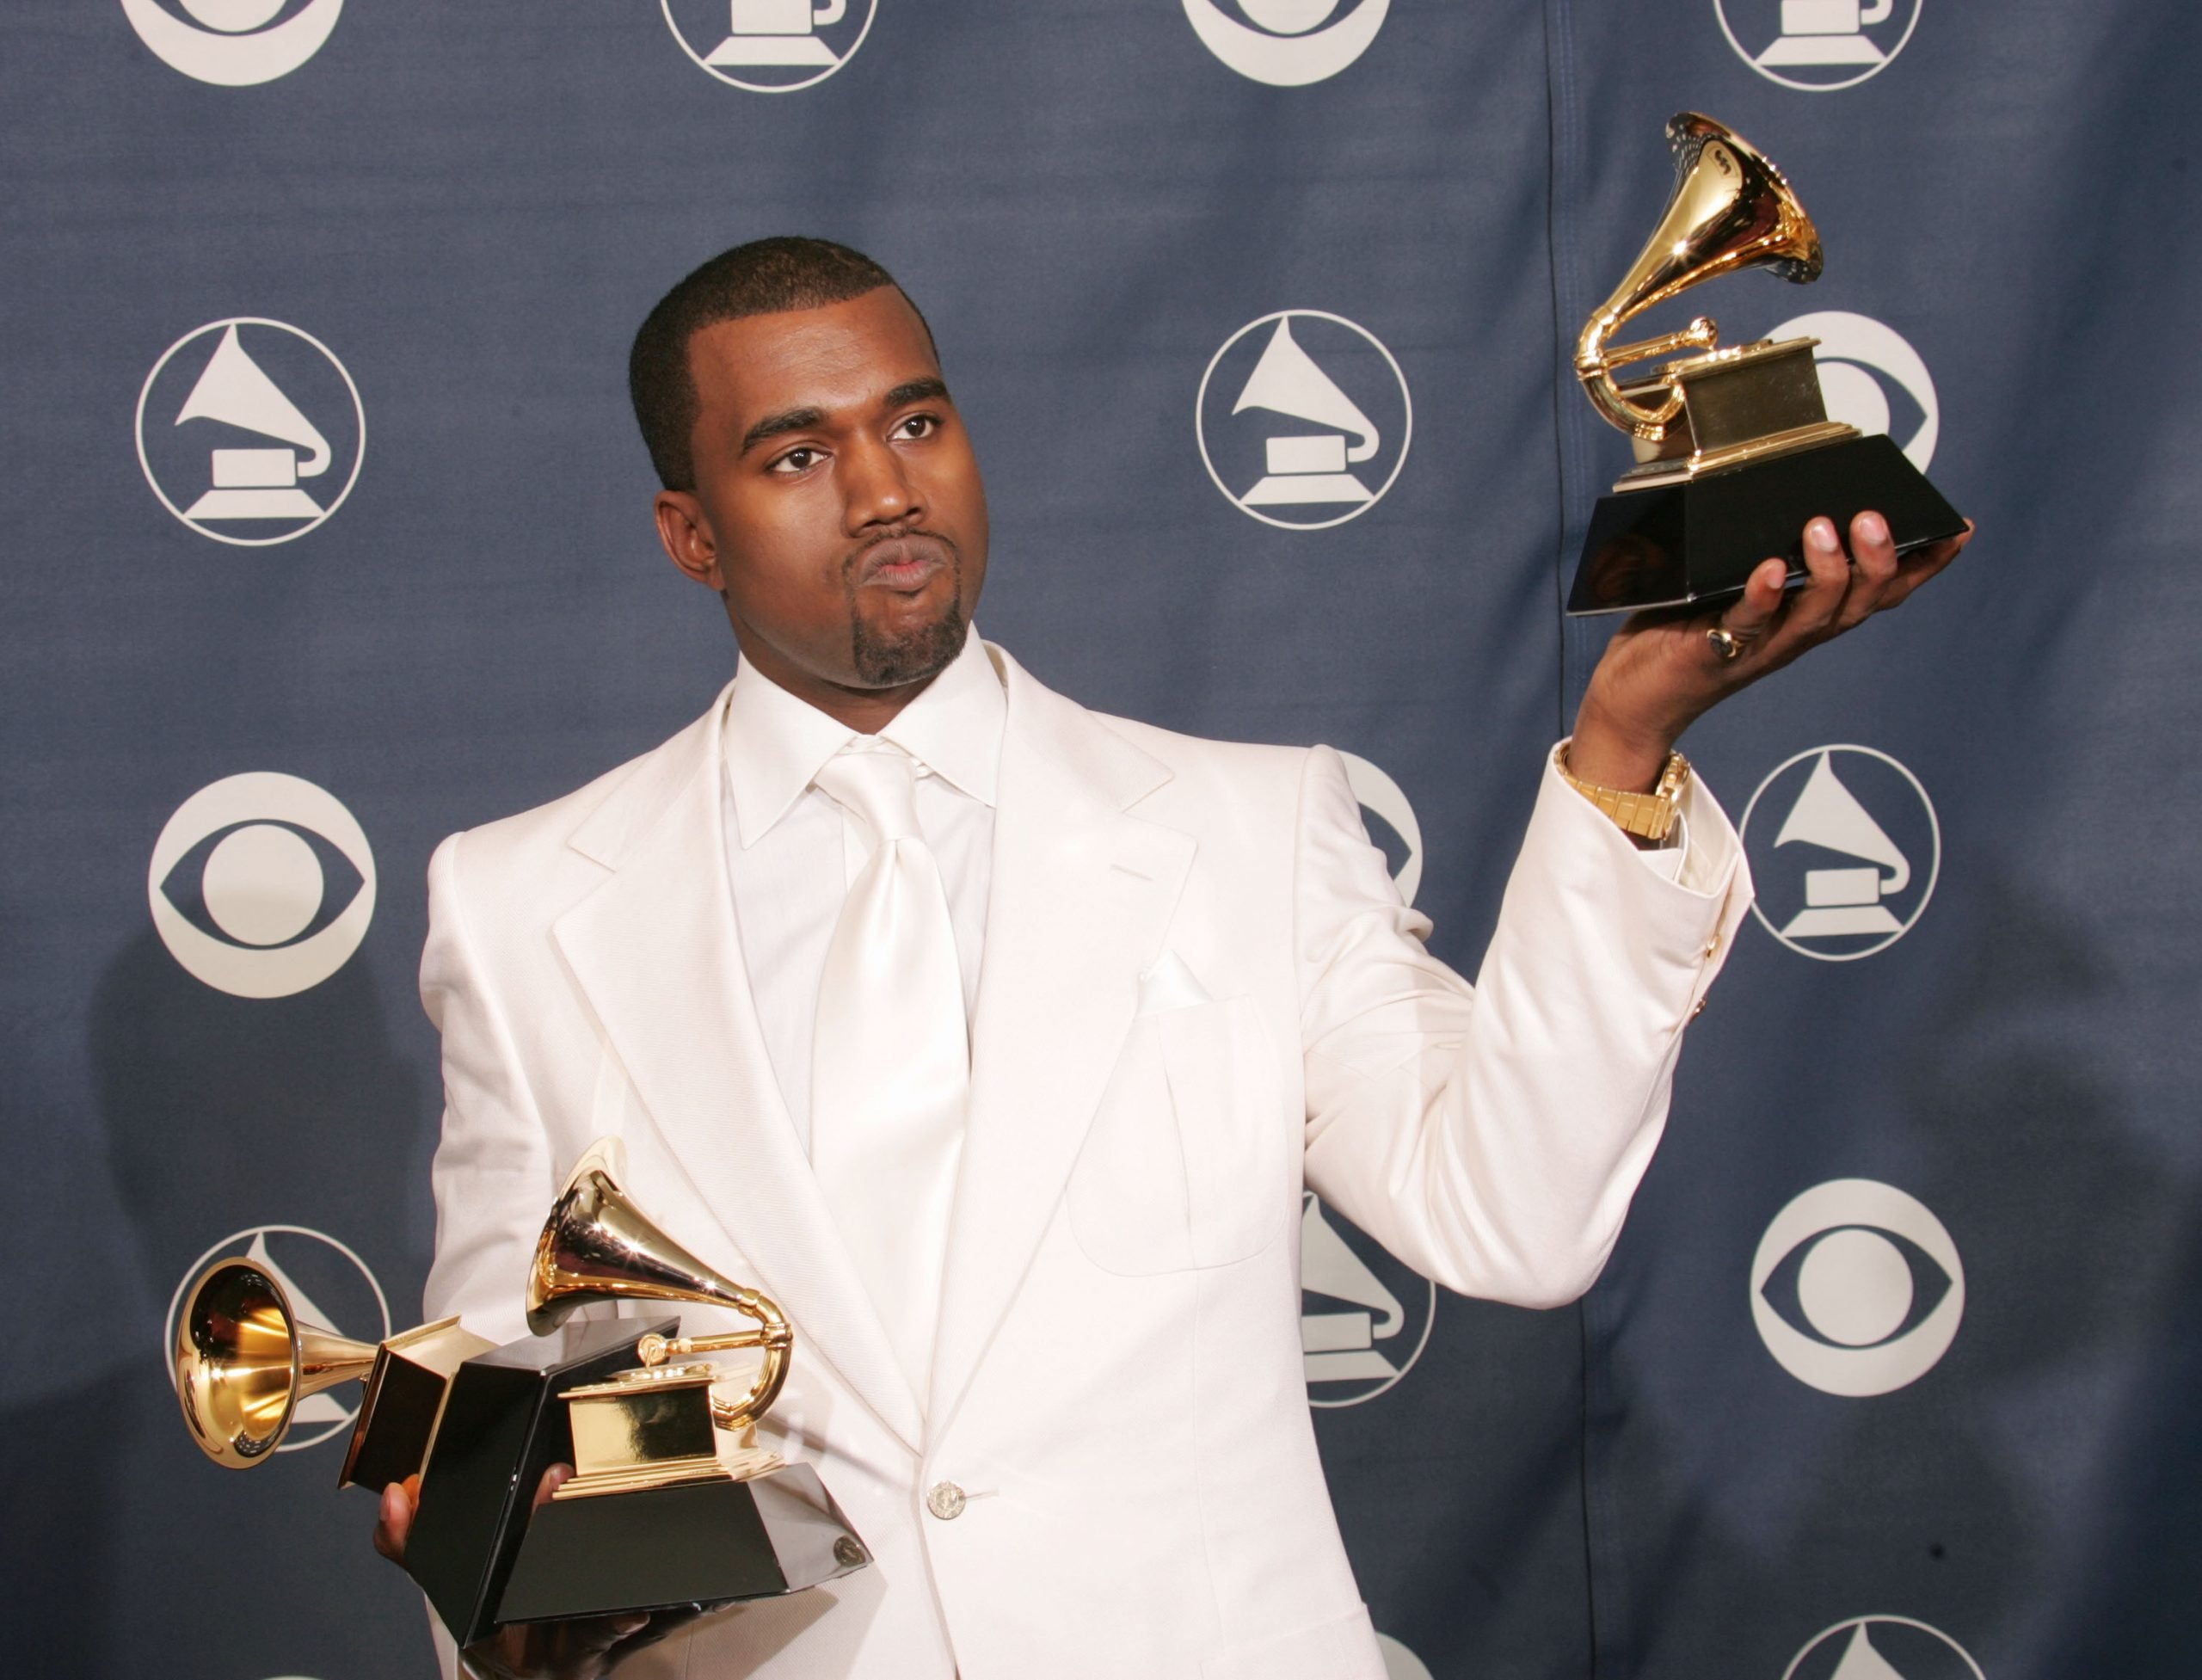 Kanye West's Most Controversial Grammy Awards Show Moments